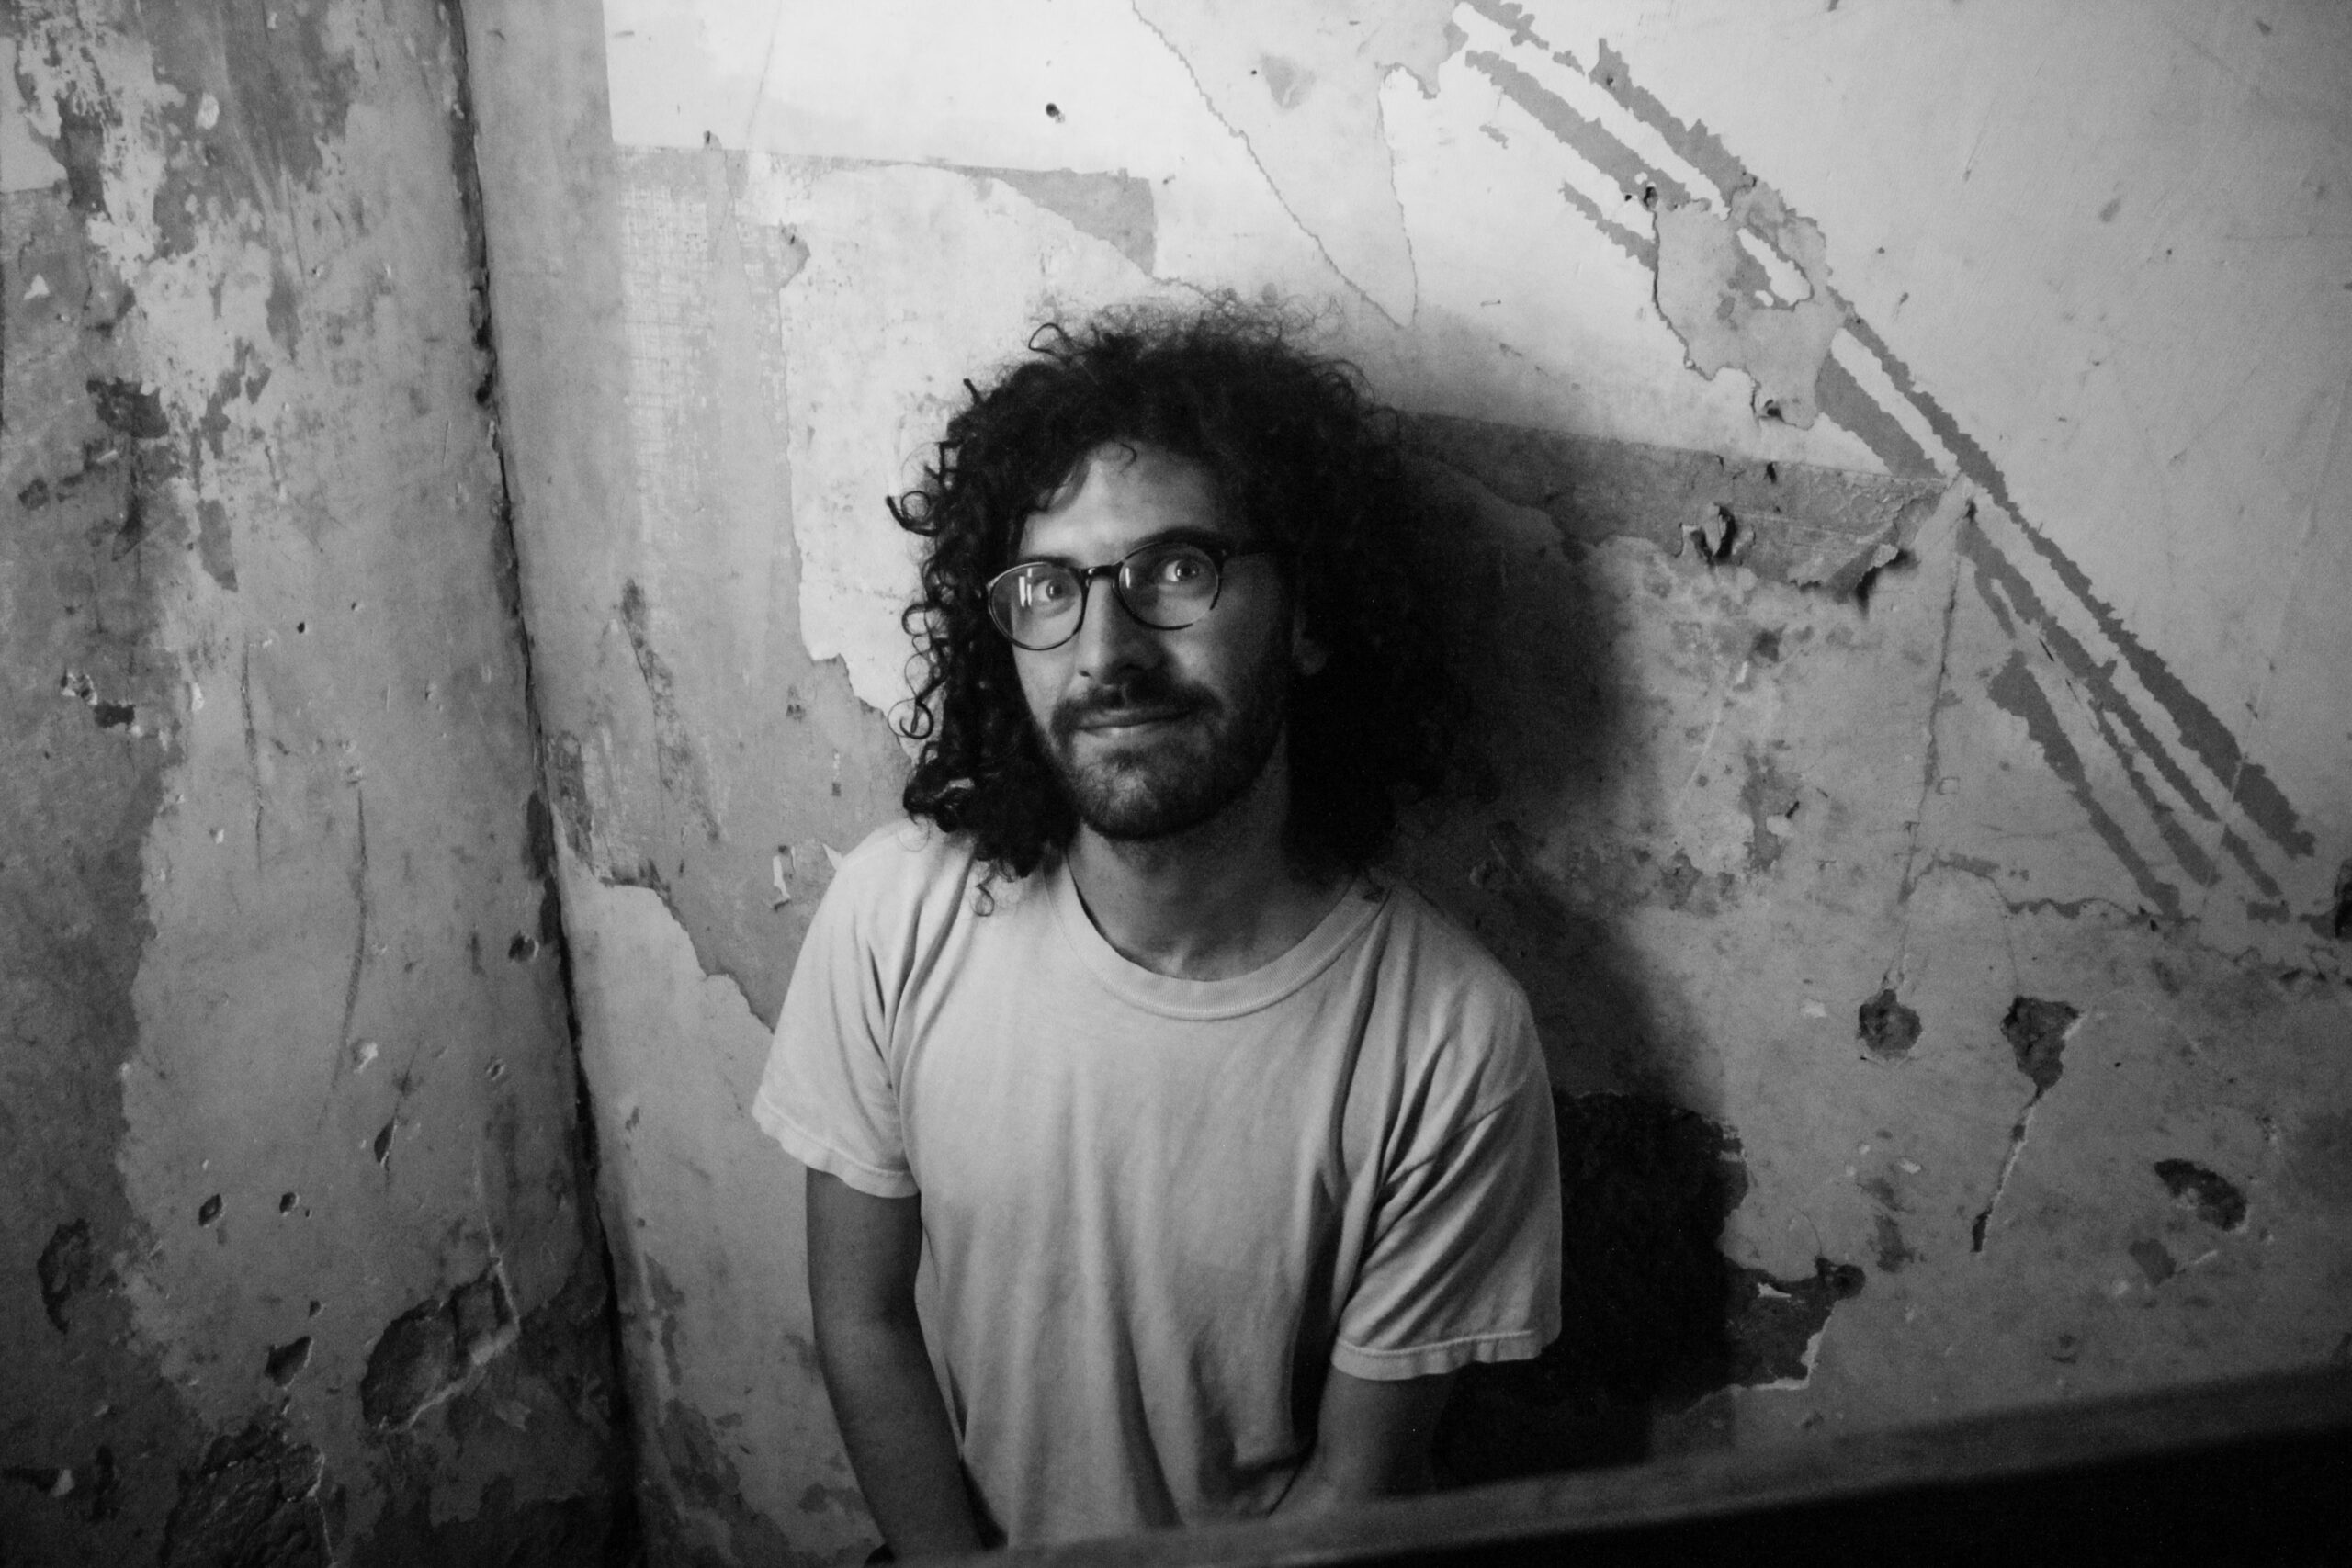 black and white photo of a person with long curly hair, a beard and glasses wearing a white t-shirt.